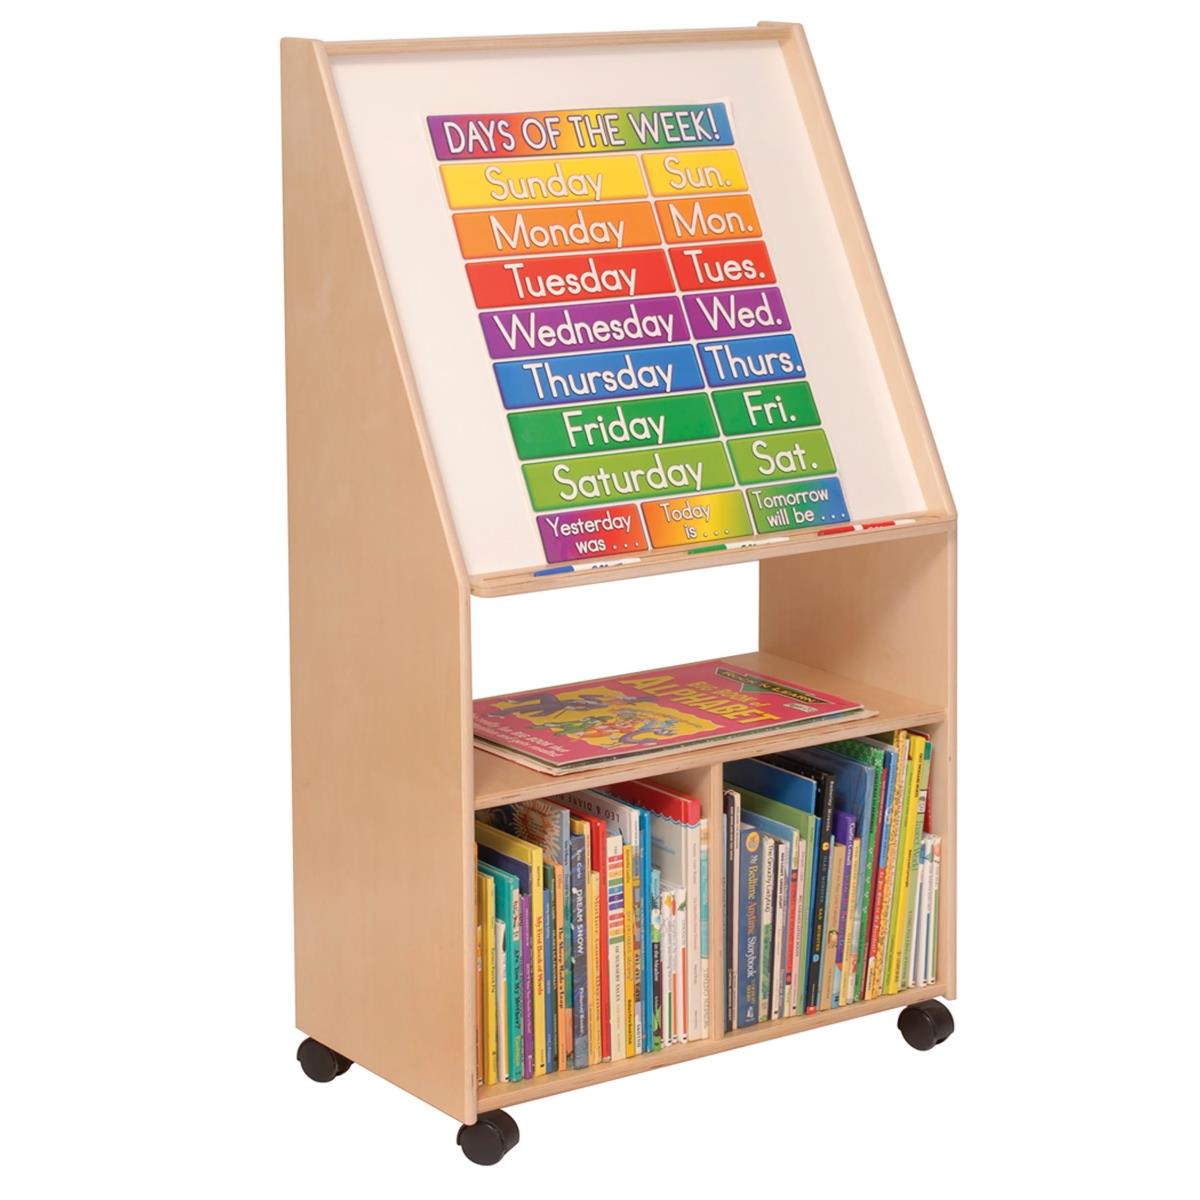 Angeles Ang1568 Brich Write & Wipe Easel With Storage - 48 X 14 X 47 In.